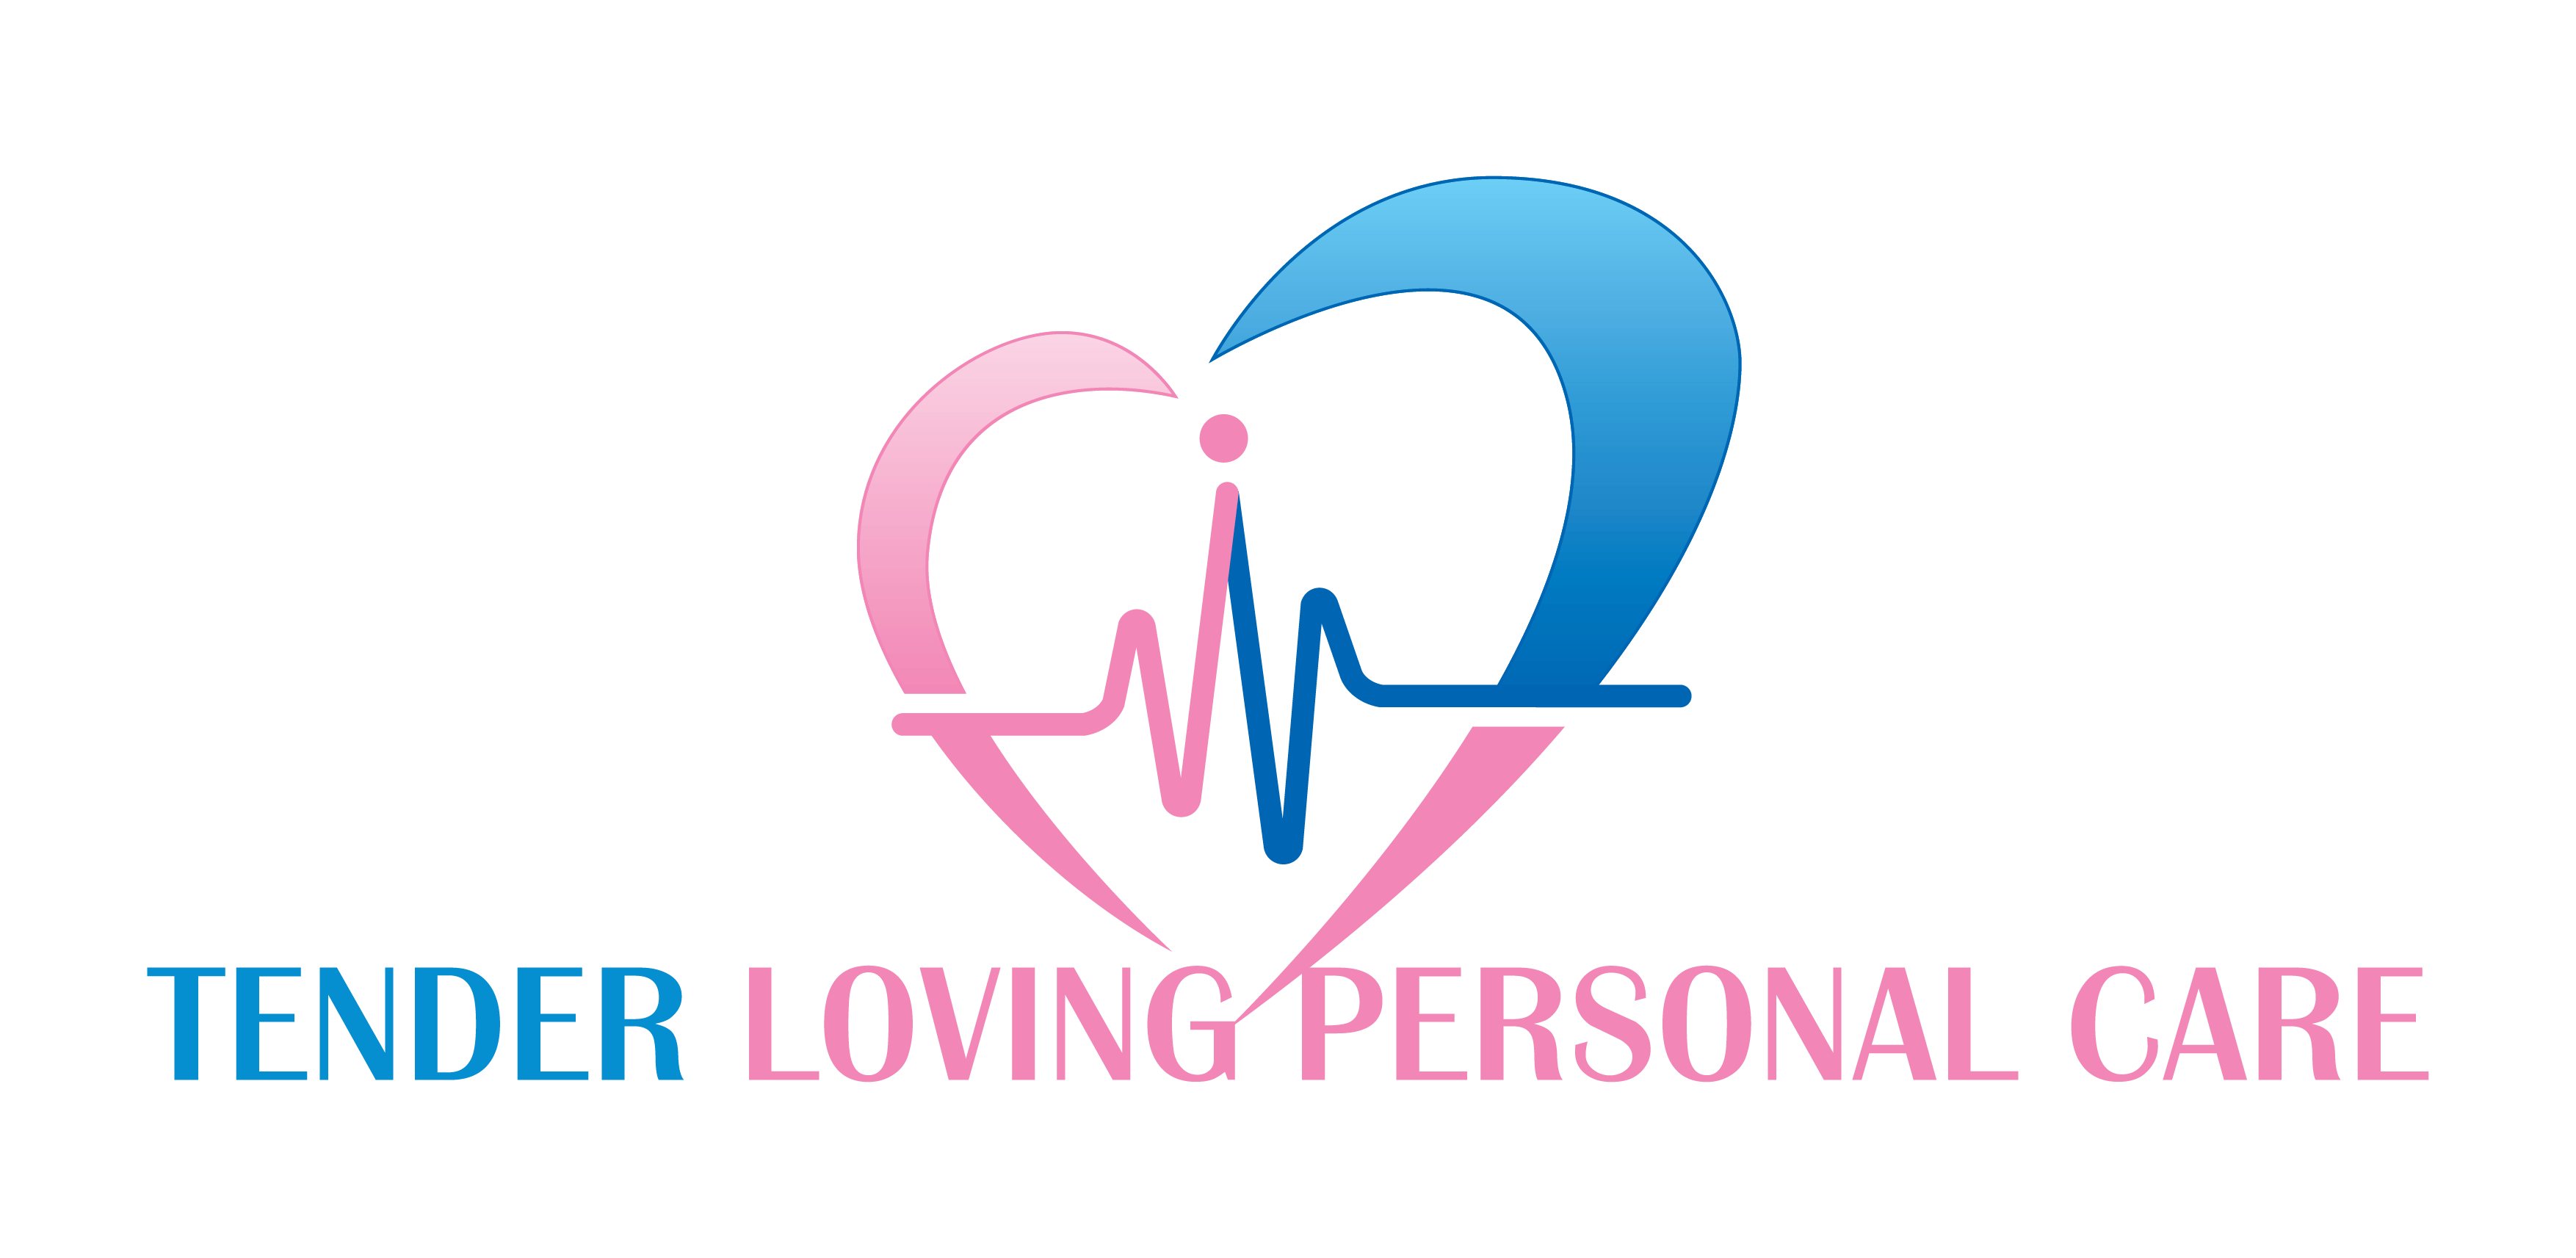 Personal Care Aide Logo - Caregivers | Home Health Aide (HHA) | Personal Care Attendant ...